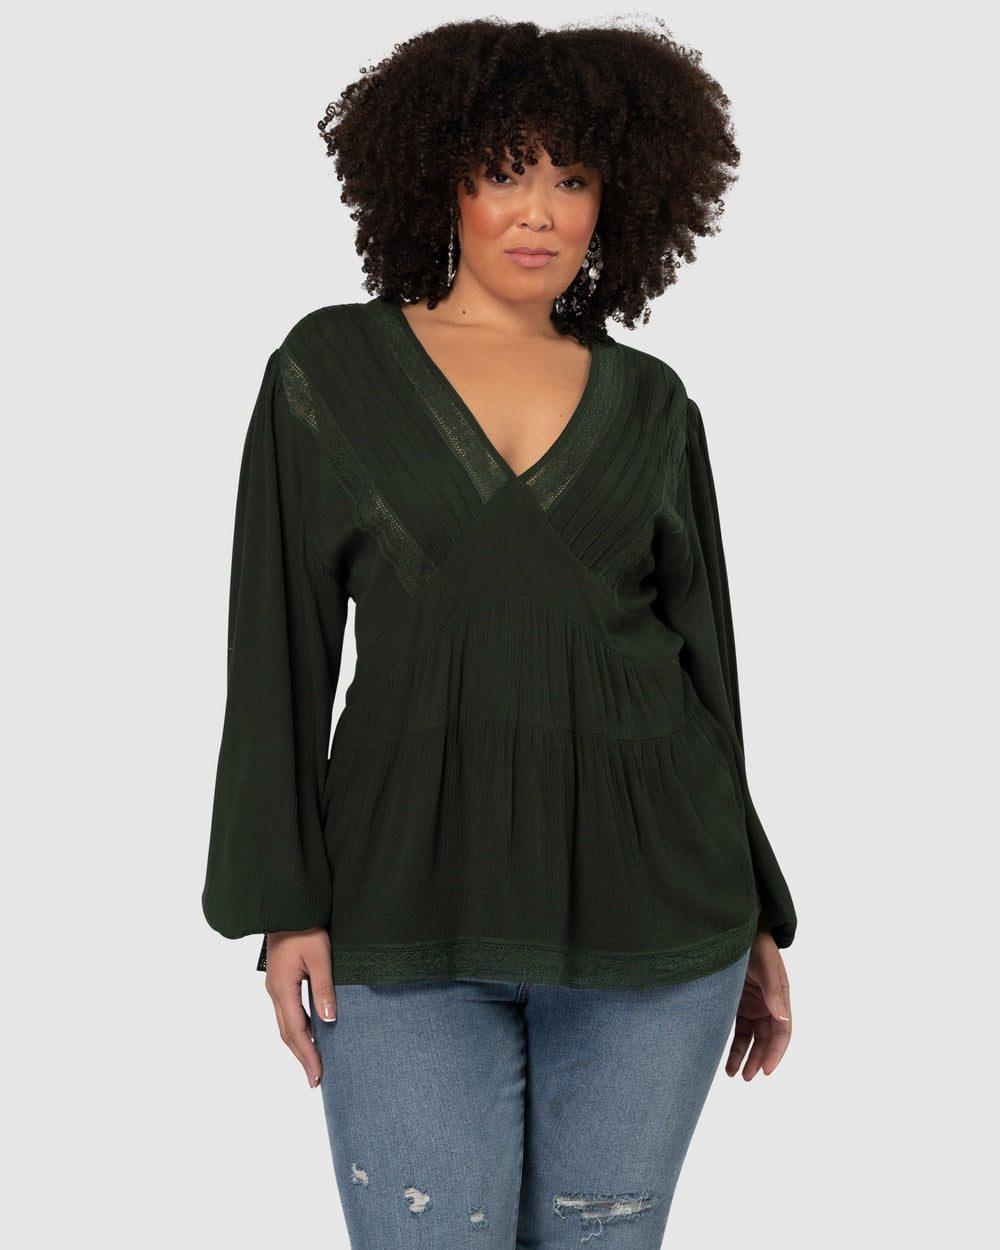 Lace Blouse in a Dark Green. Pair with either the chocolate pants or skinny jeans.